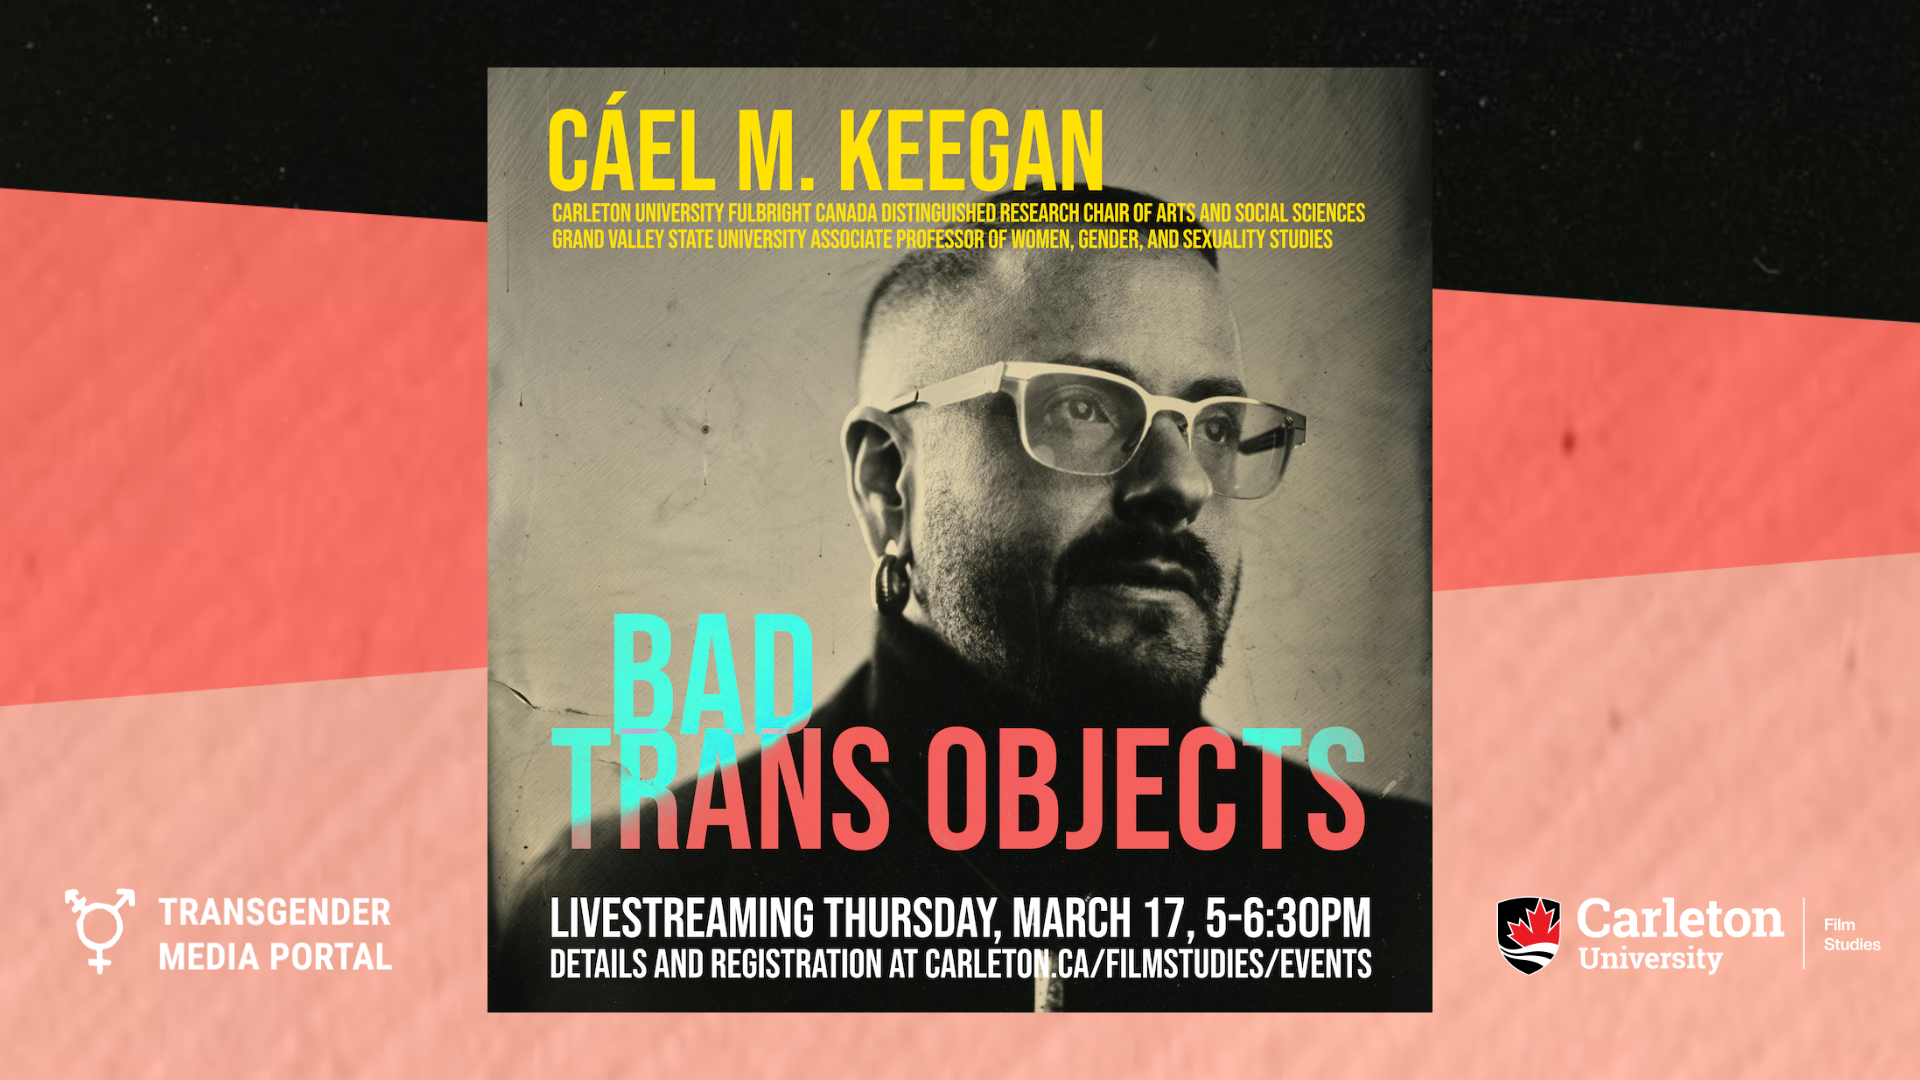 Thumbnail of a Cael Keegan's 'Bad Trans Objects' video on Vimeo